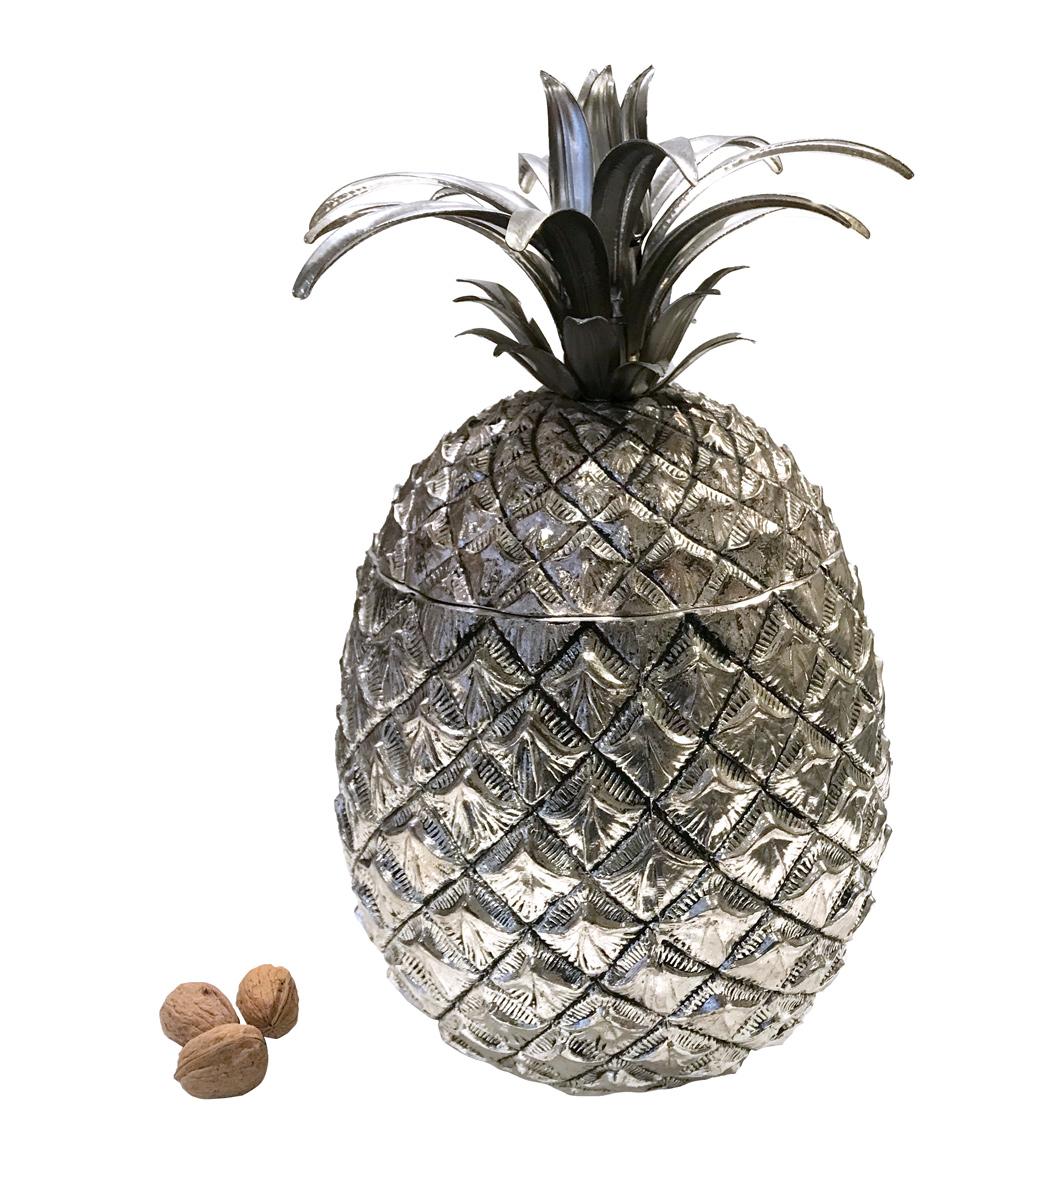 Exceptional King Size Pineapple Ice bucket, designed by Mauro Manetti.
The pineapple ice bucket is his world-famous iconic piece: the small model is very known and has been copied many times but this giant one is very rare. The shape is very nice